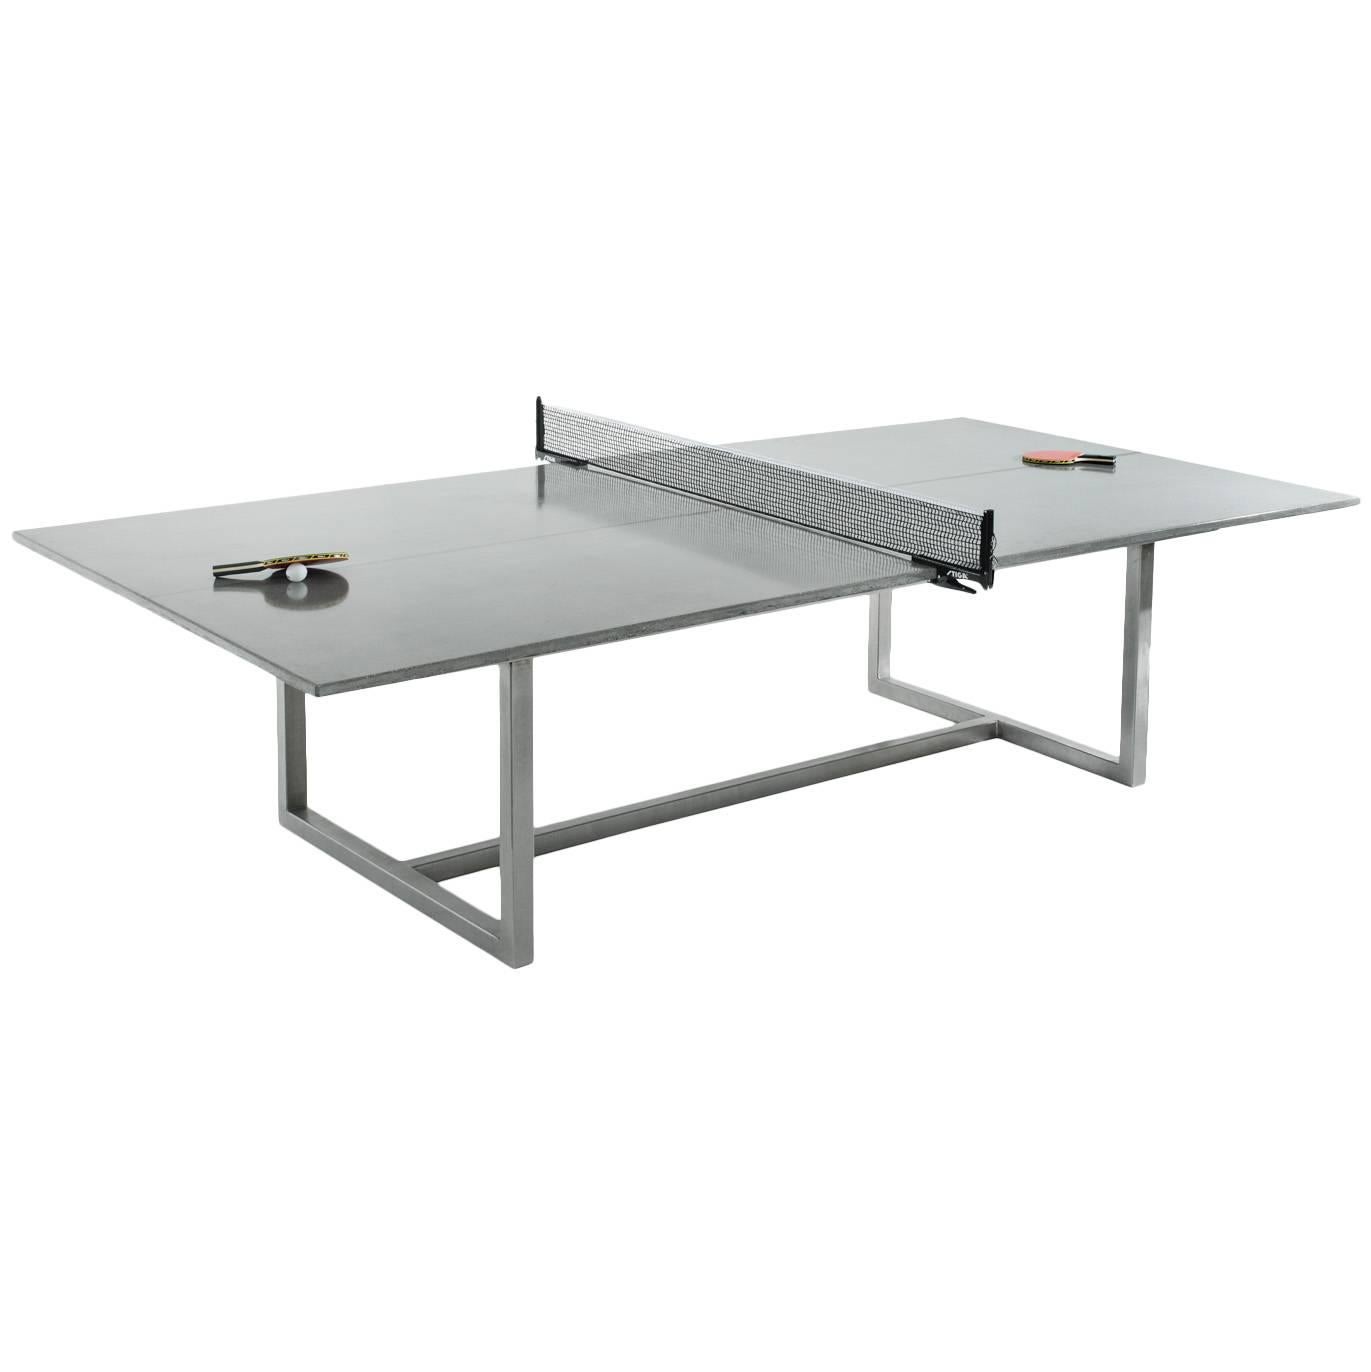 James de Wulf Vue Concrete Ping Pong Table, Stainless Steel Base - Standard